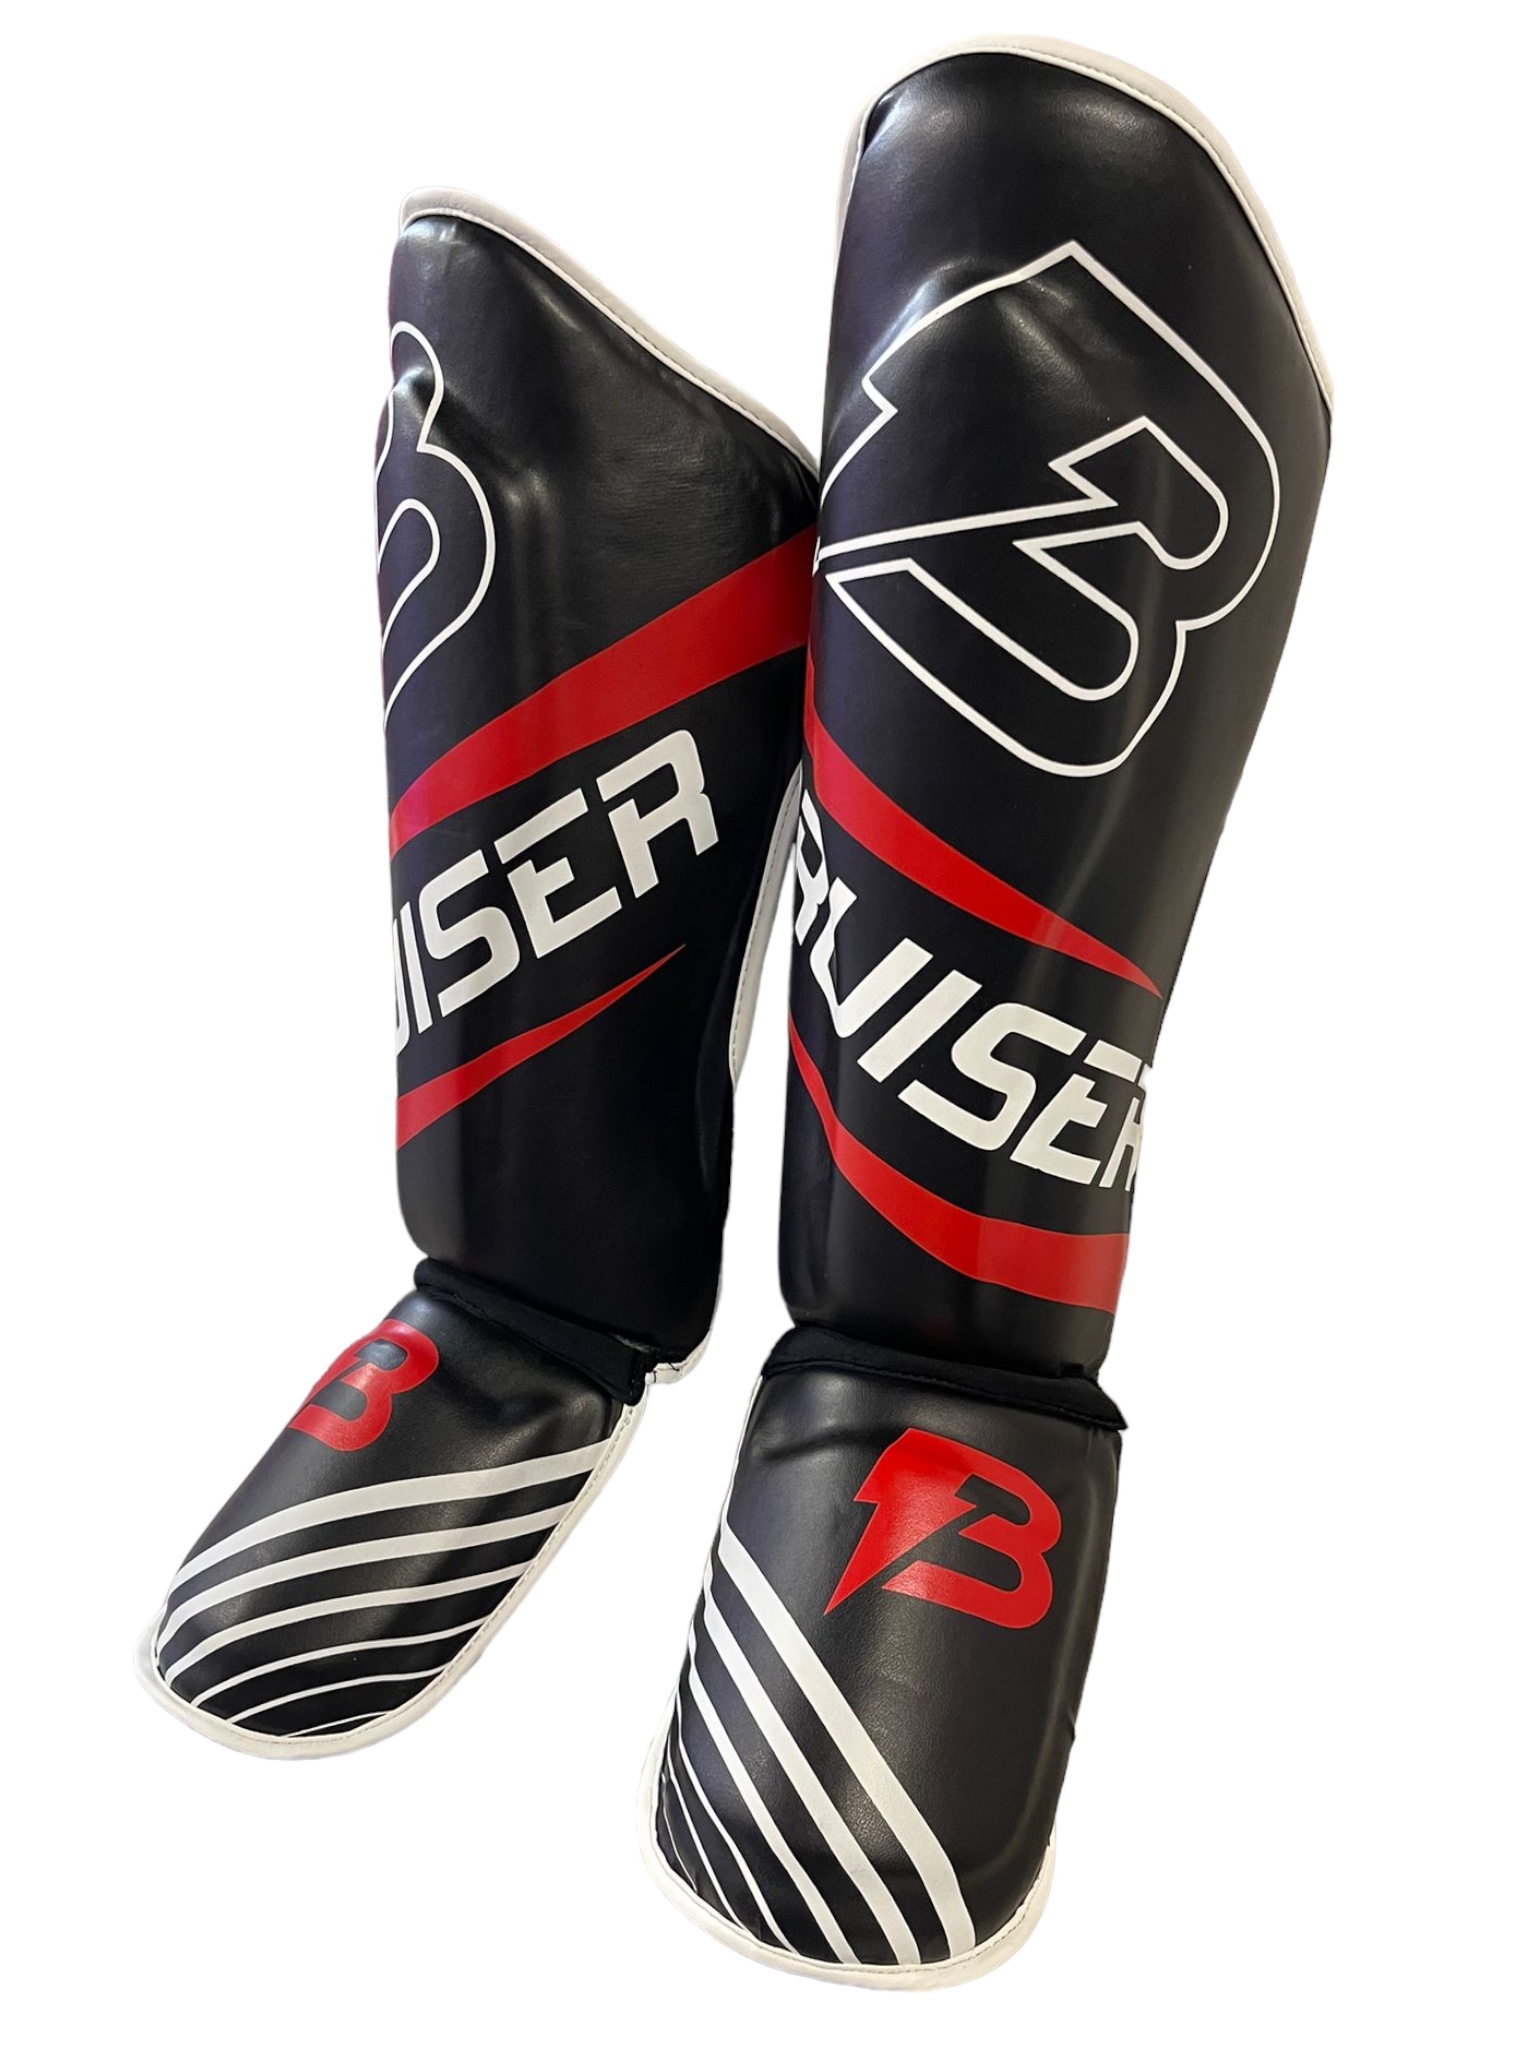 Sparring Shin guards with instep for Muay Thai and MMA